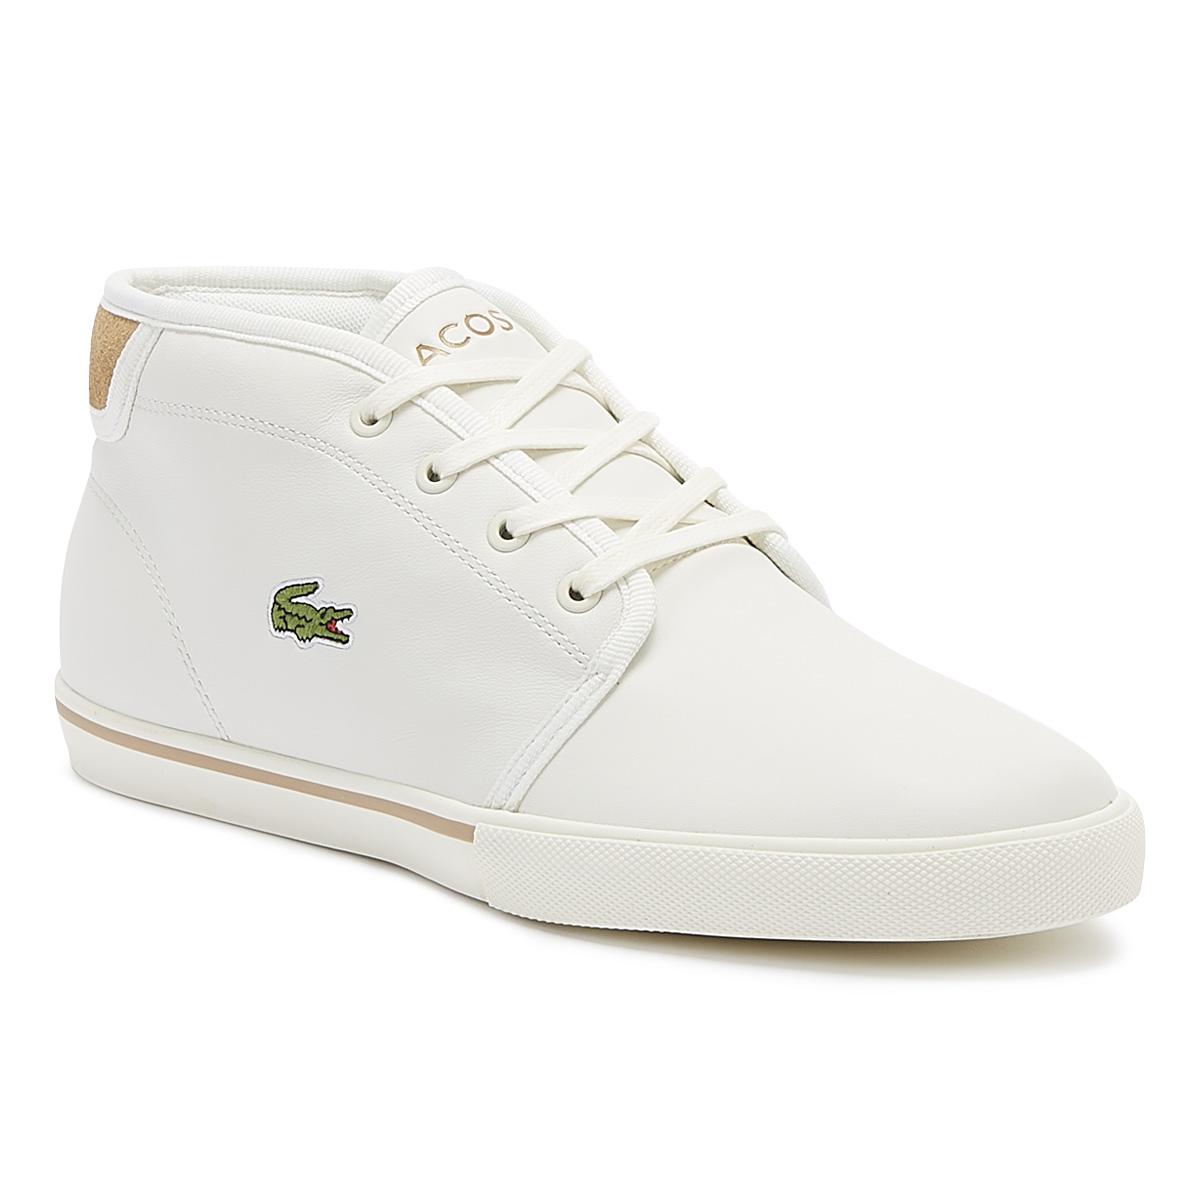 Lacoste Leather Ampthill 119 1 Cma Hi-top Trainers in White for Men - Lyst